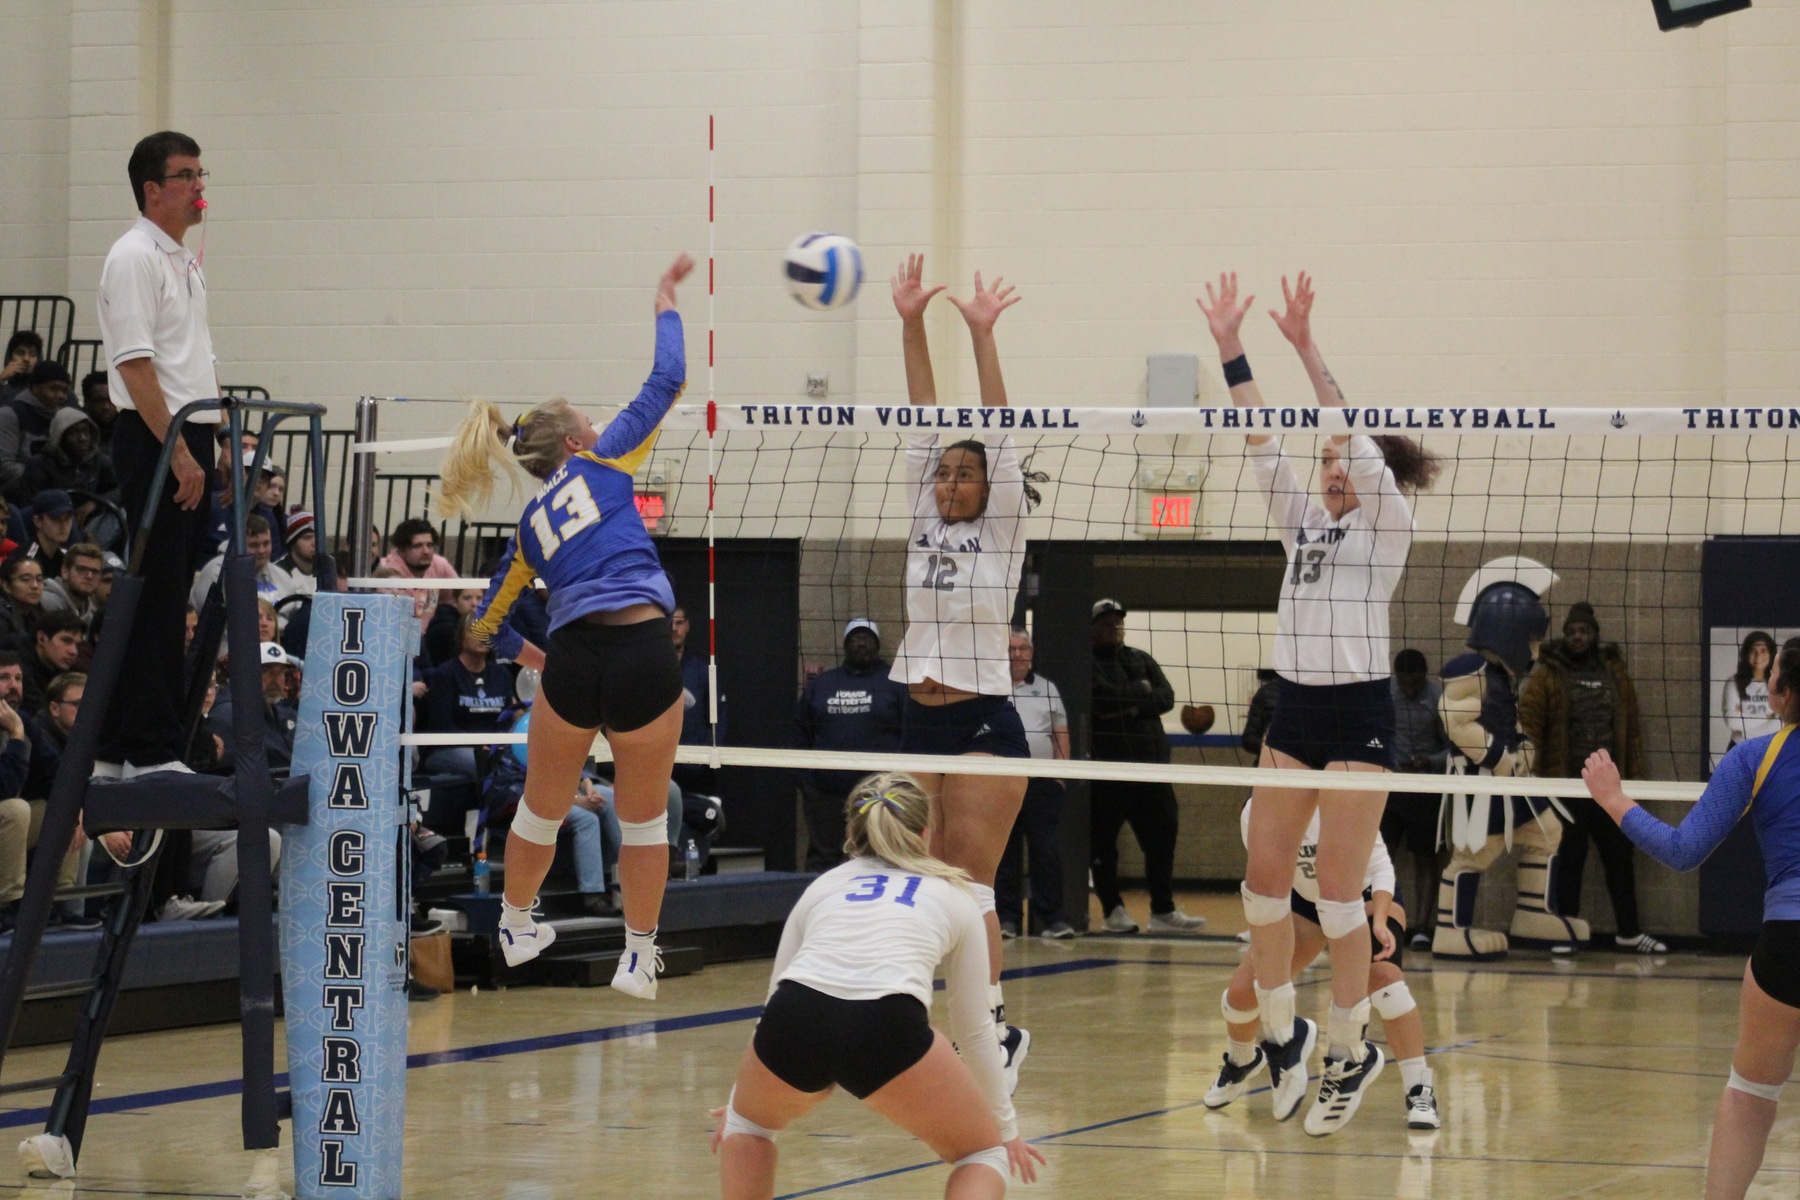 Alexa Loftus hits the ball over the net in Wednesday's match at Iowa Central.